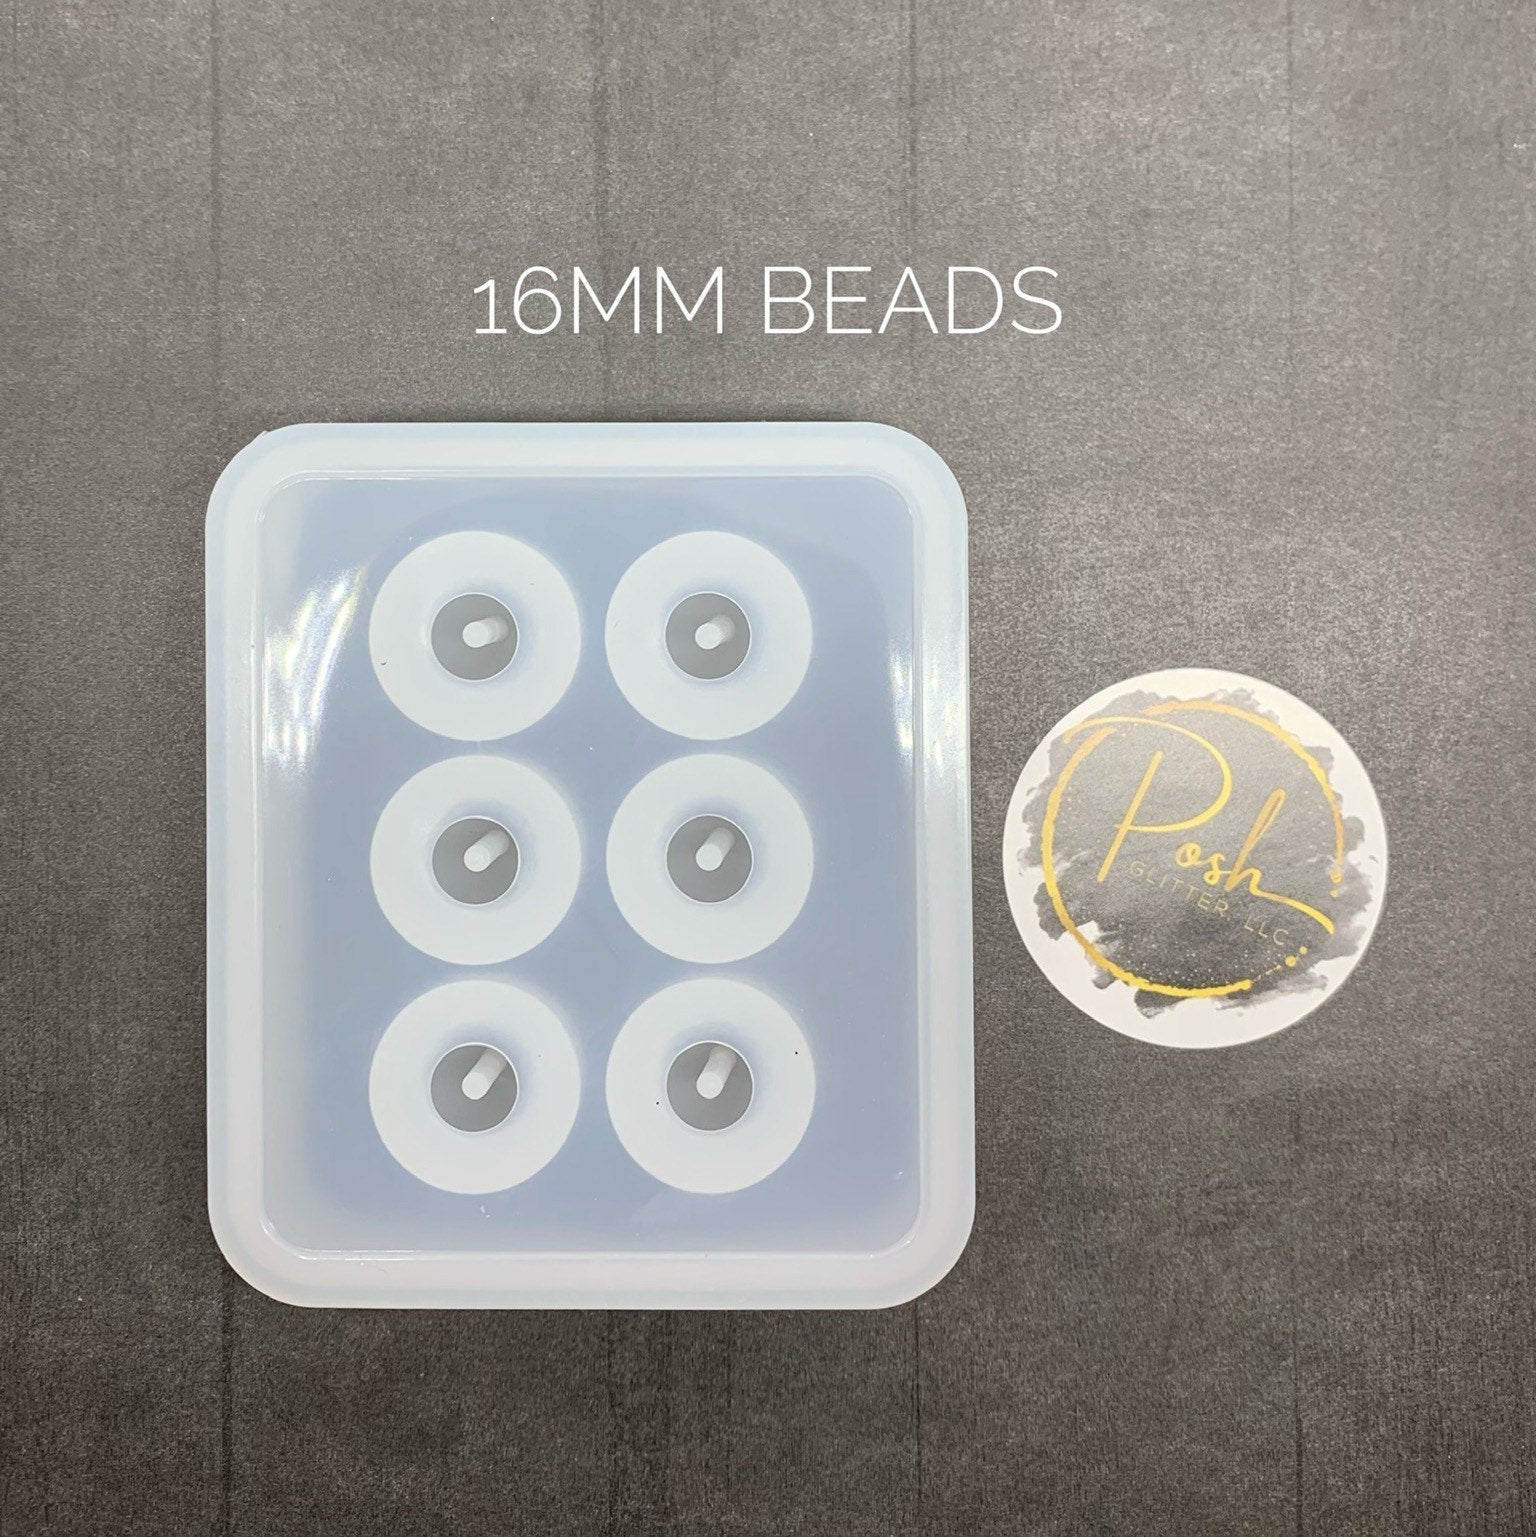 12mm Beads Silicone Mold-round Bead Resin Mold-silicone Bead Mold